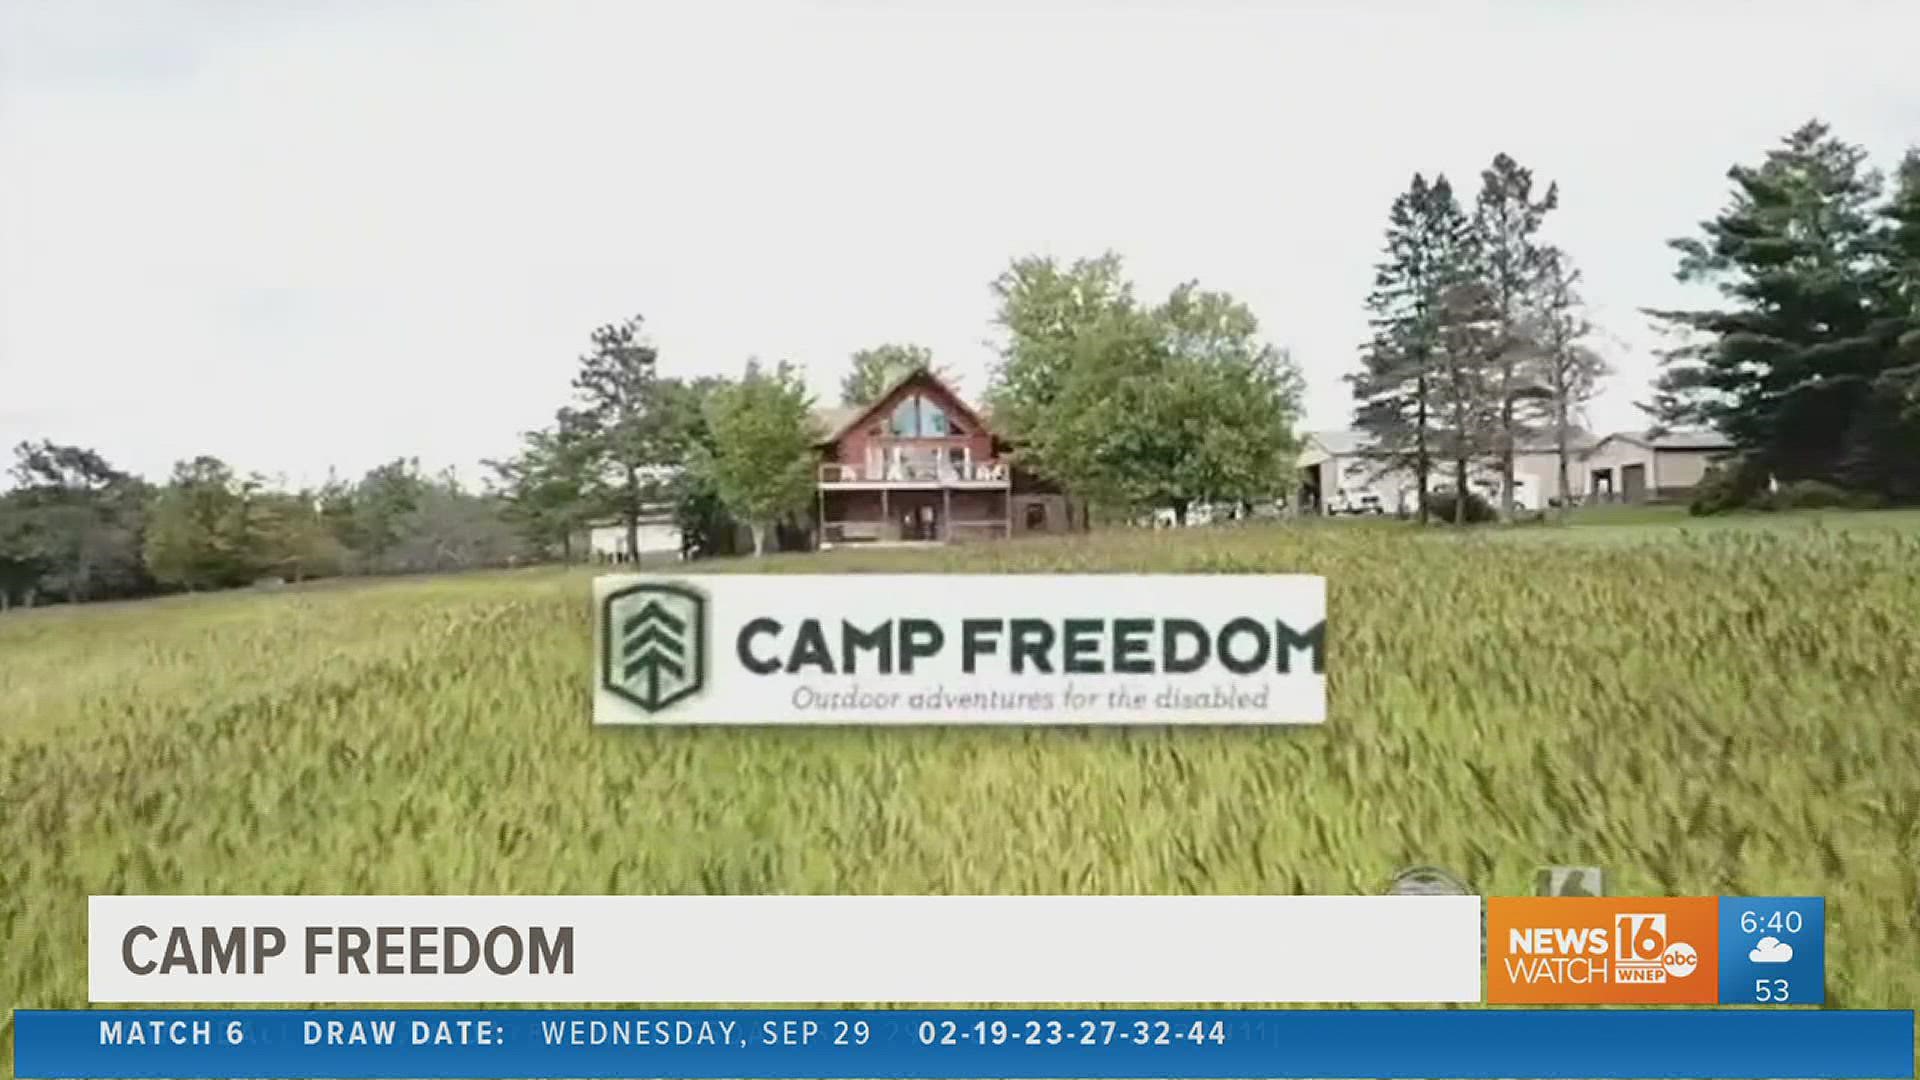 Camp Freedom just outside of Carbondale is gearing up to launch more outdoor programs this fall to help those struggling with their mental health.